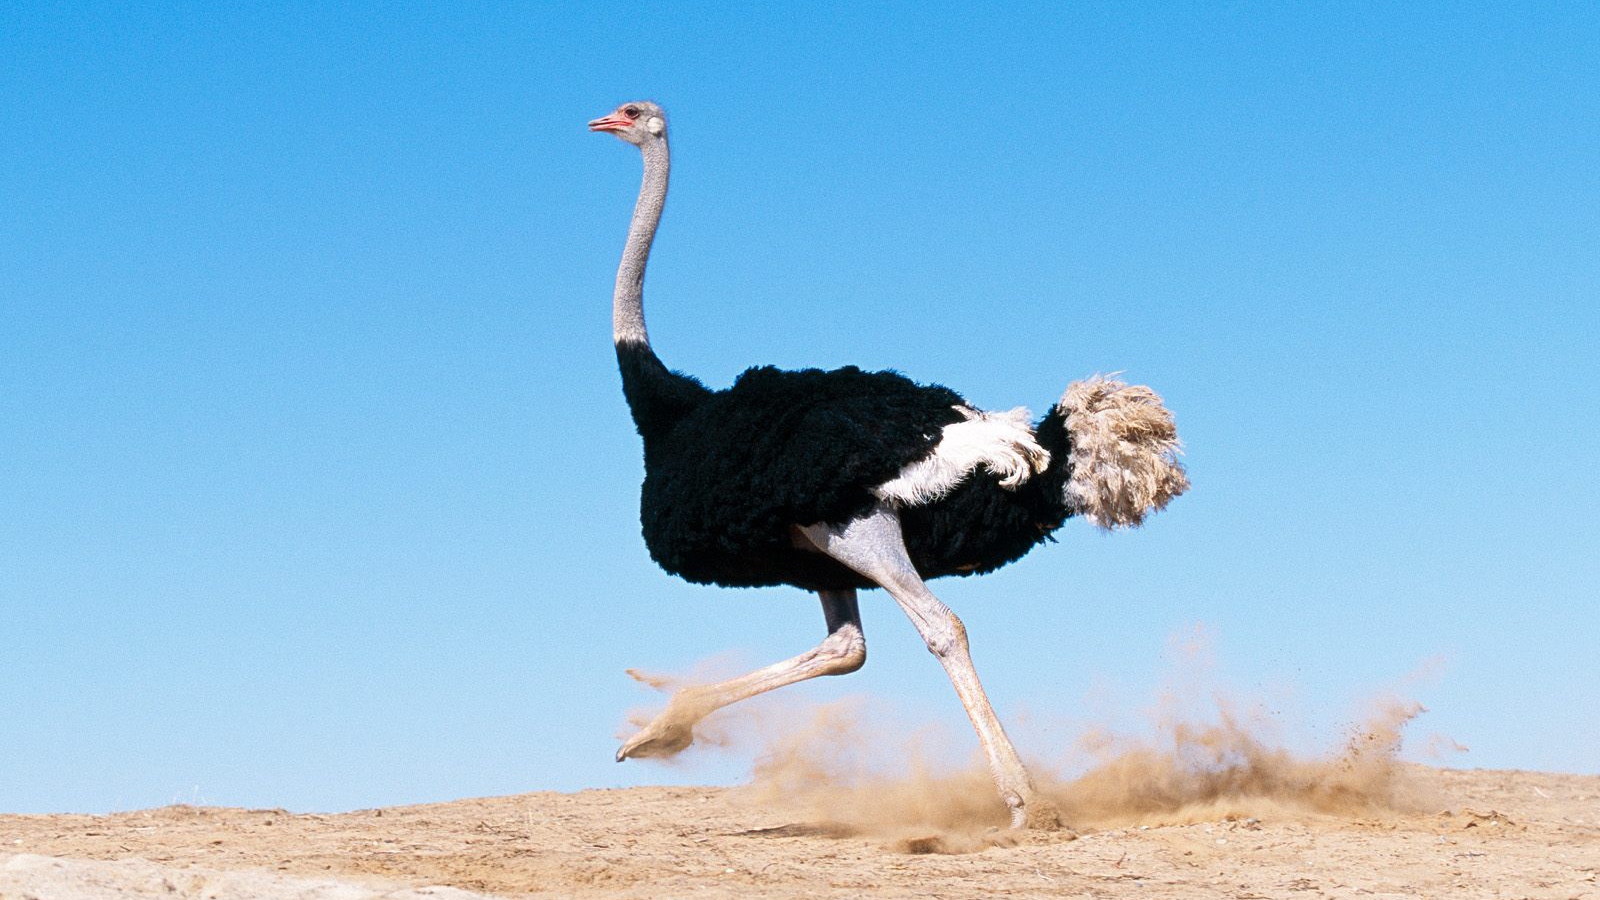 Black Feathered Ostrich / Africa